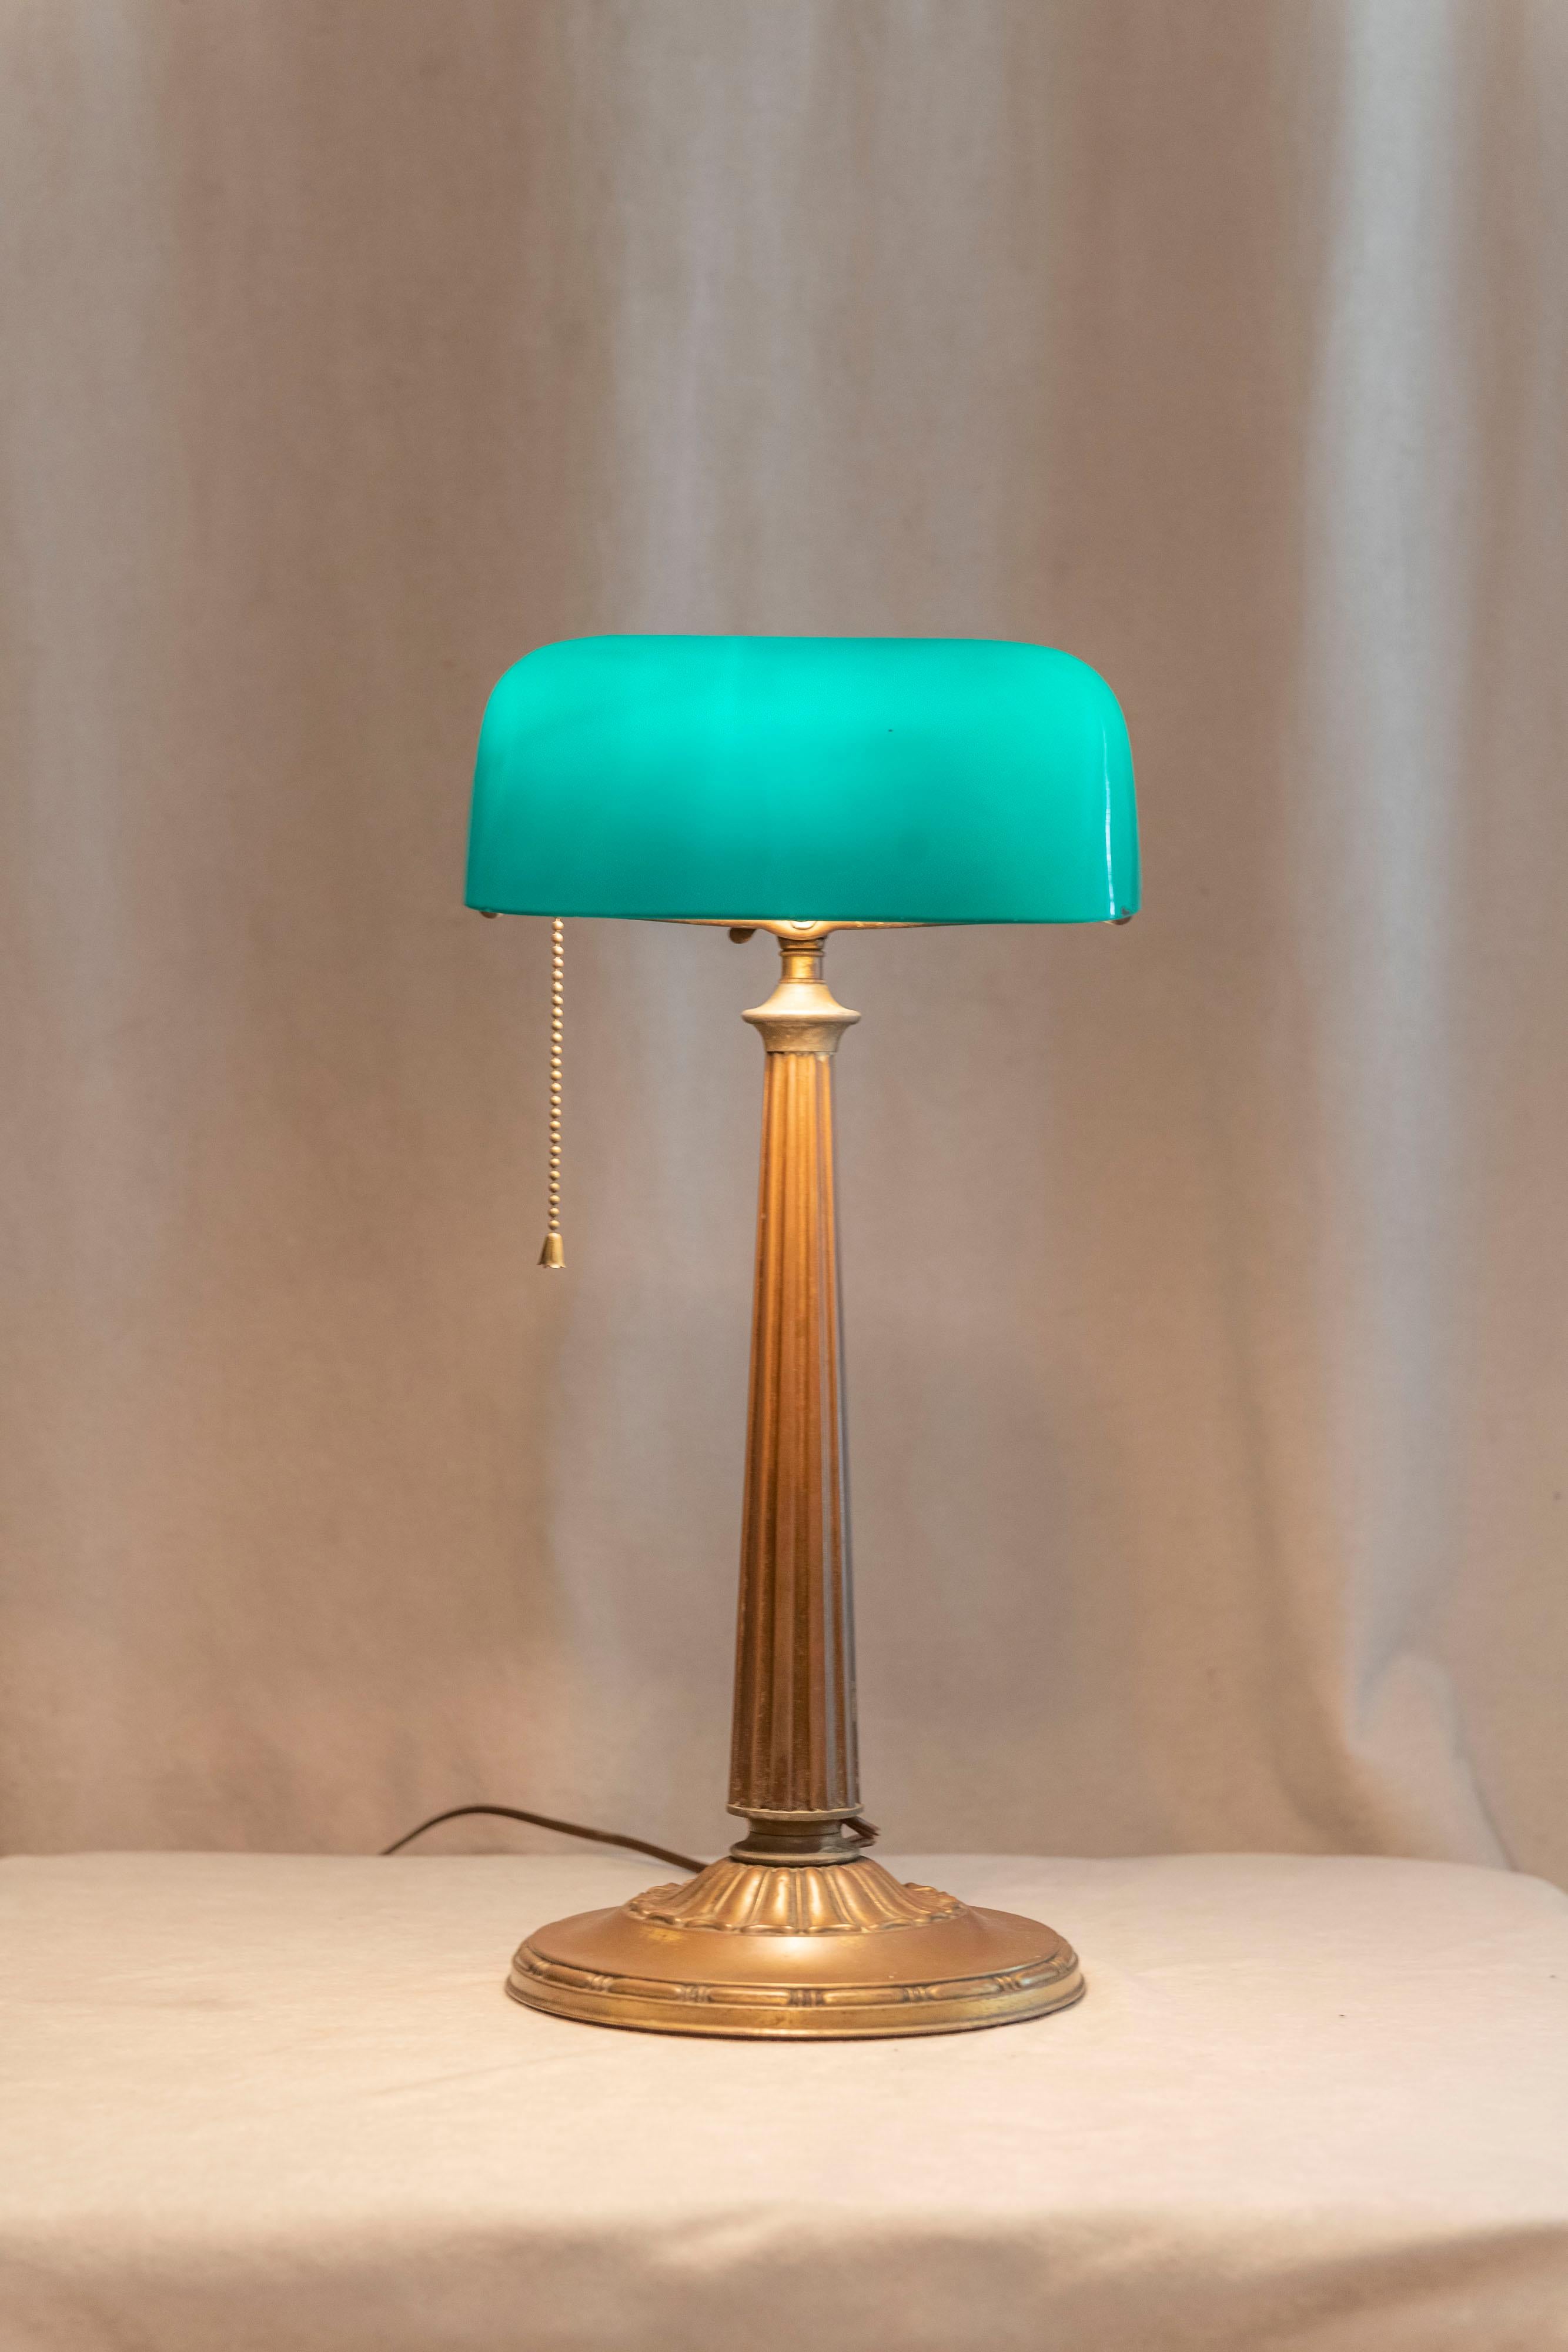 Emeralite was the premier maker of banker's lamps for many years in the early part of the 20th century. Factory patinated brass base, and the shade is what is known as 